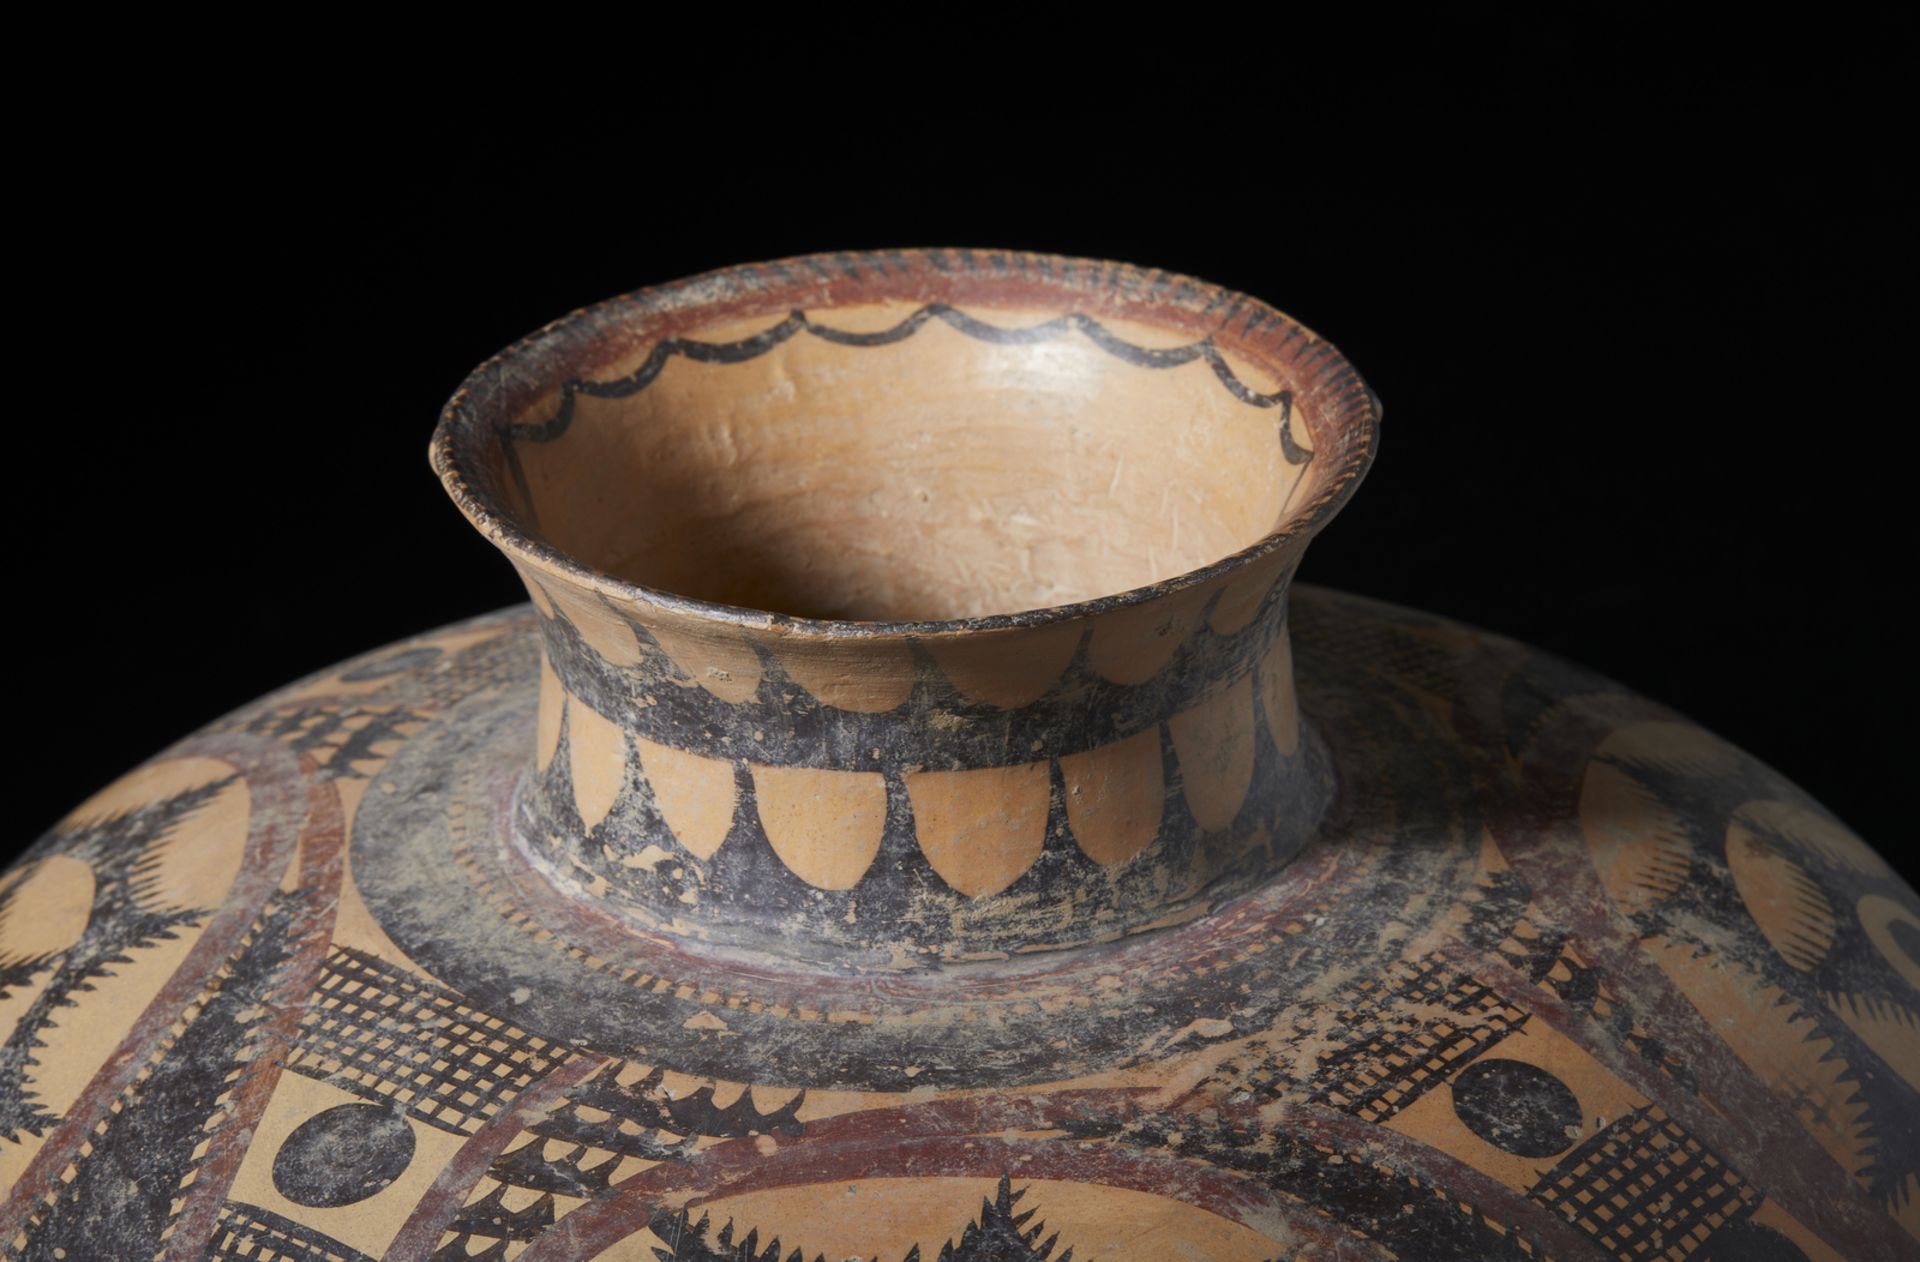 A fine polichrome earthenware jar China, Yangshao culture, 5th-6th millenium bCCm 37,50 x 32,00 - Image 4 of 5